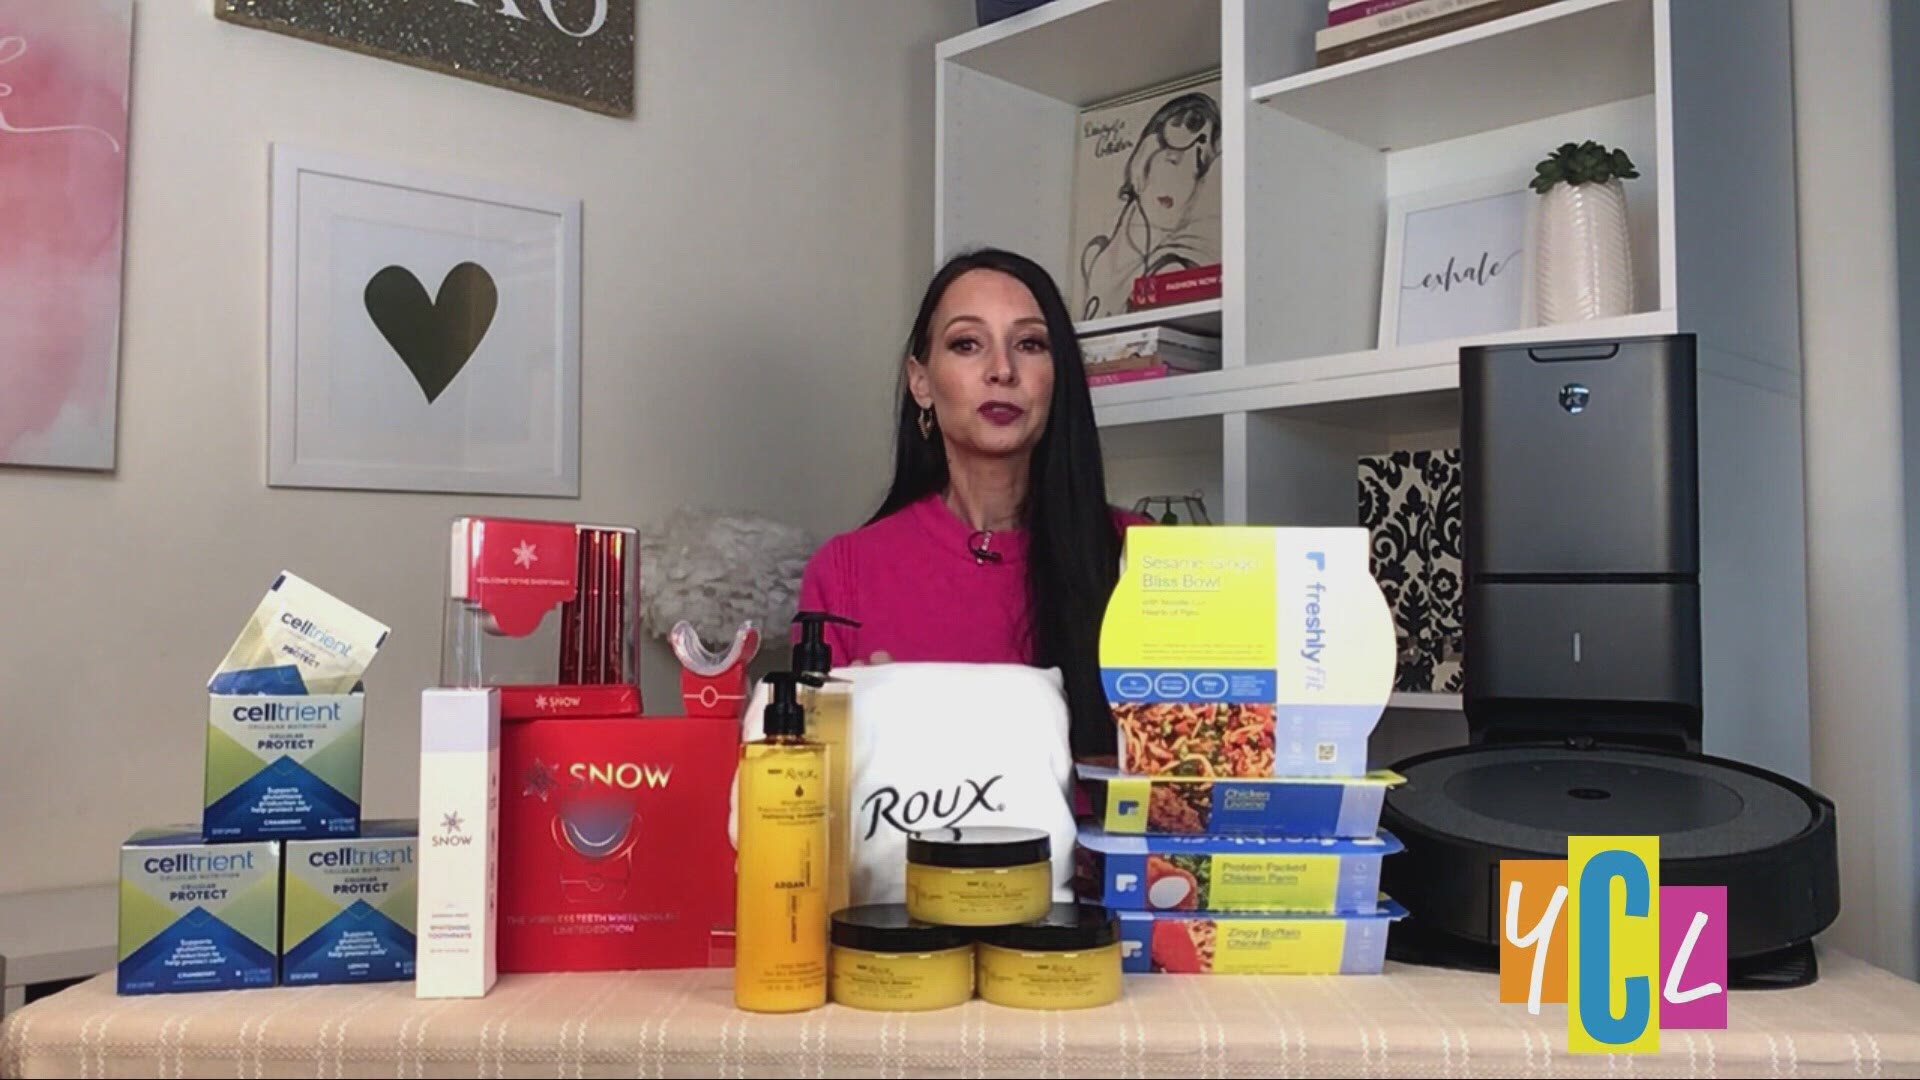 Event and Lifestyle Expert, Jamie O’Donnell shares her must-have items to reset for the winter. 
This segment was paid for by Jamie O’ + Co.